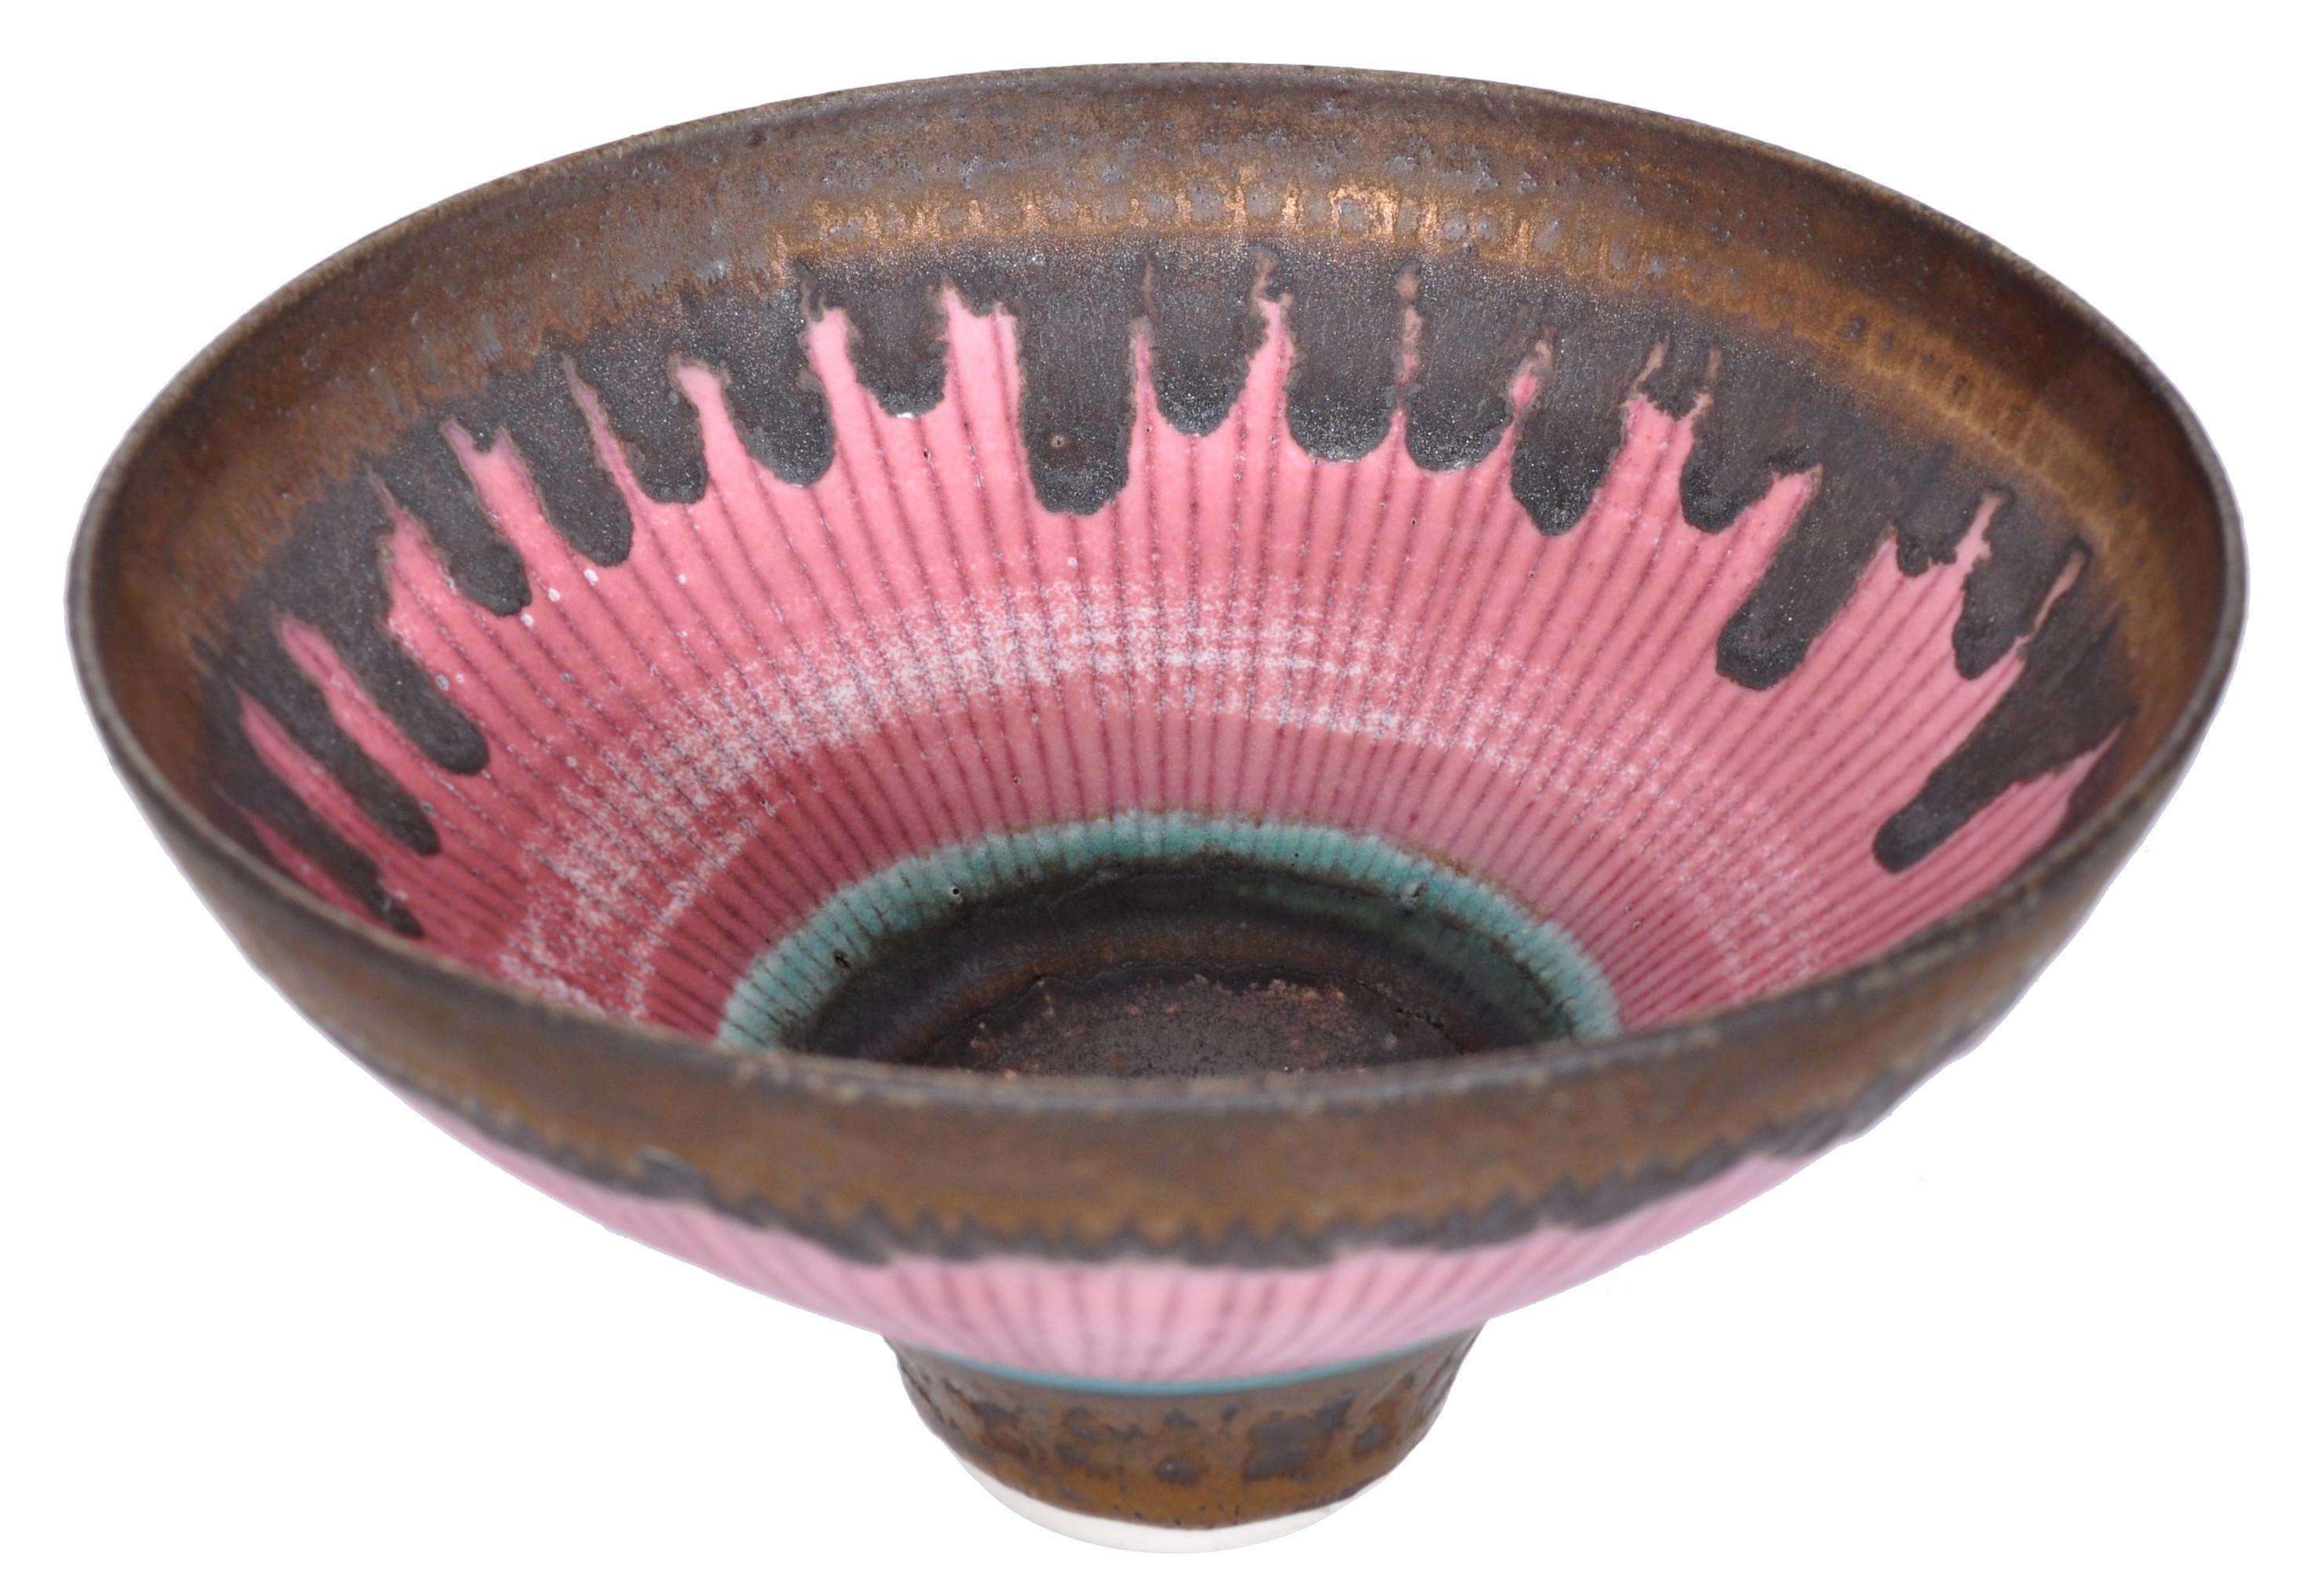 Late 20th Century Important Dame Lucie Rie Footed Porcelain Bowl, circa 1978